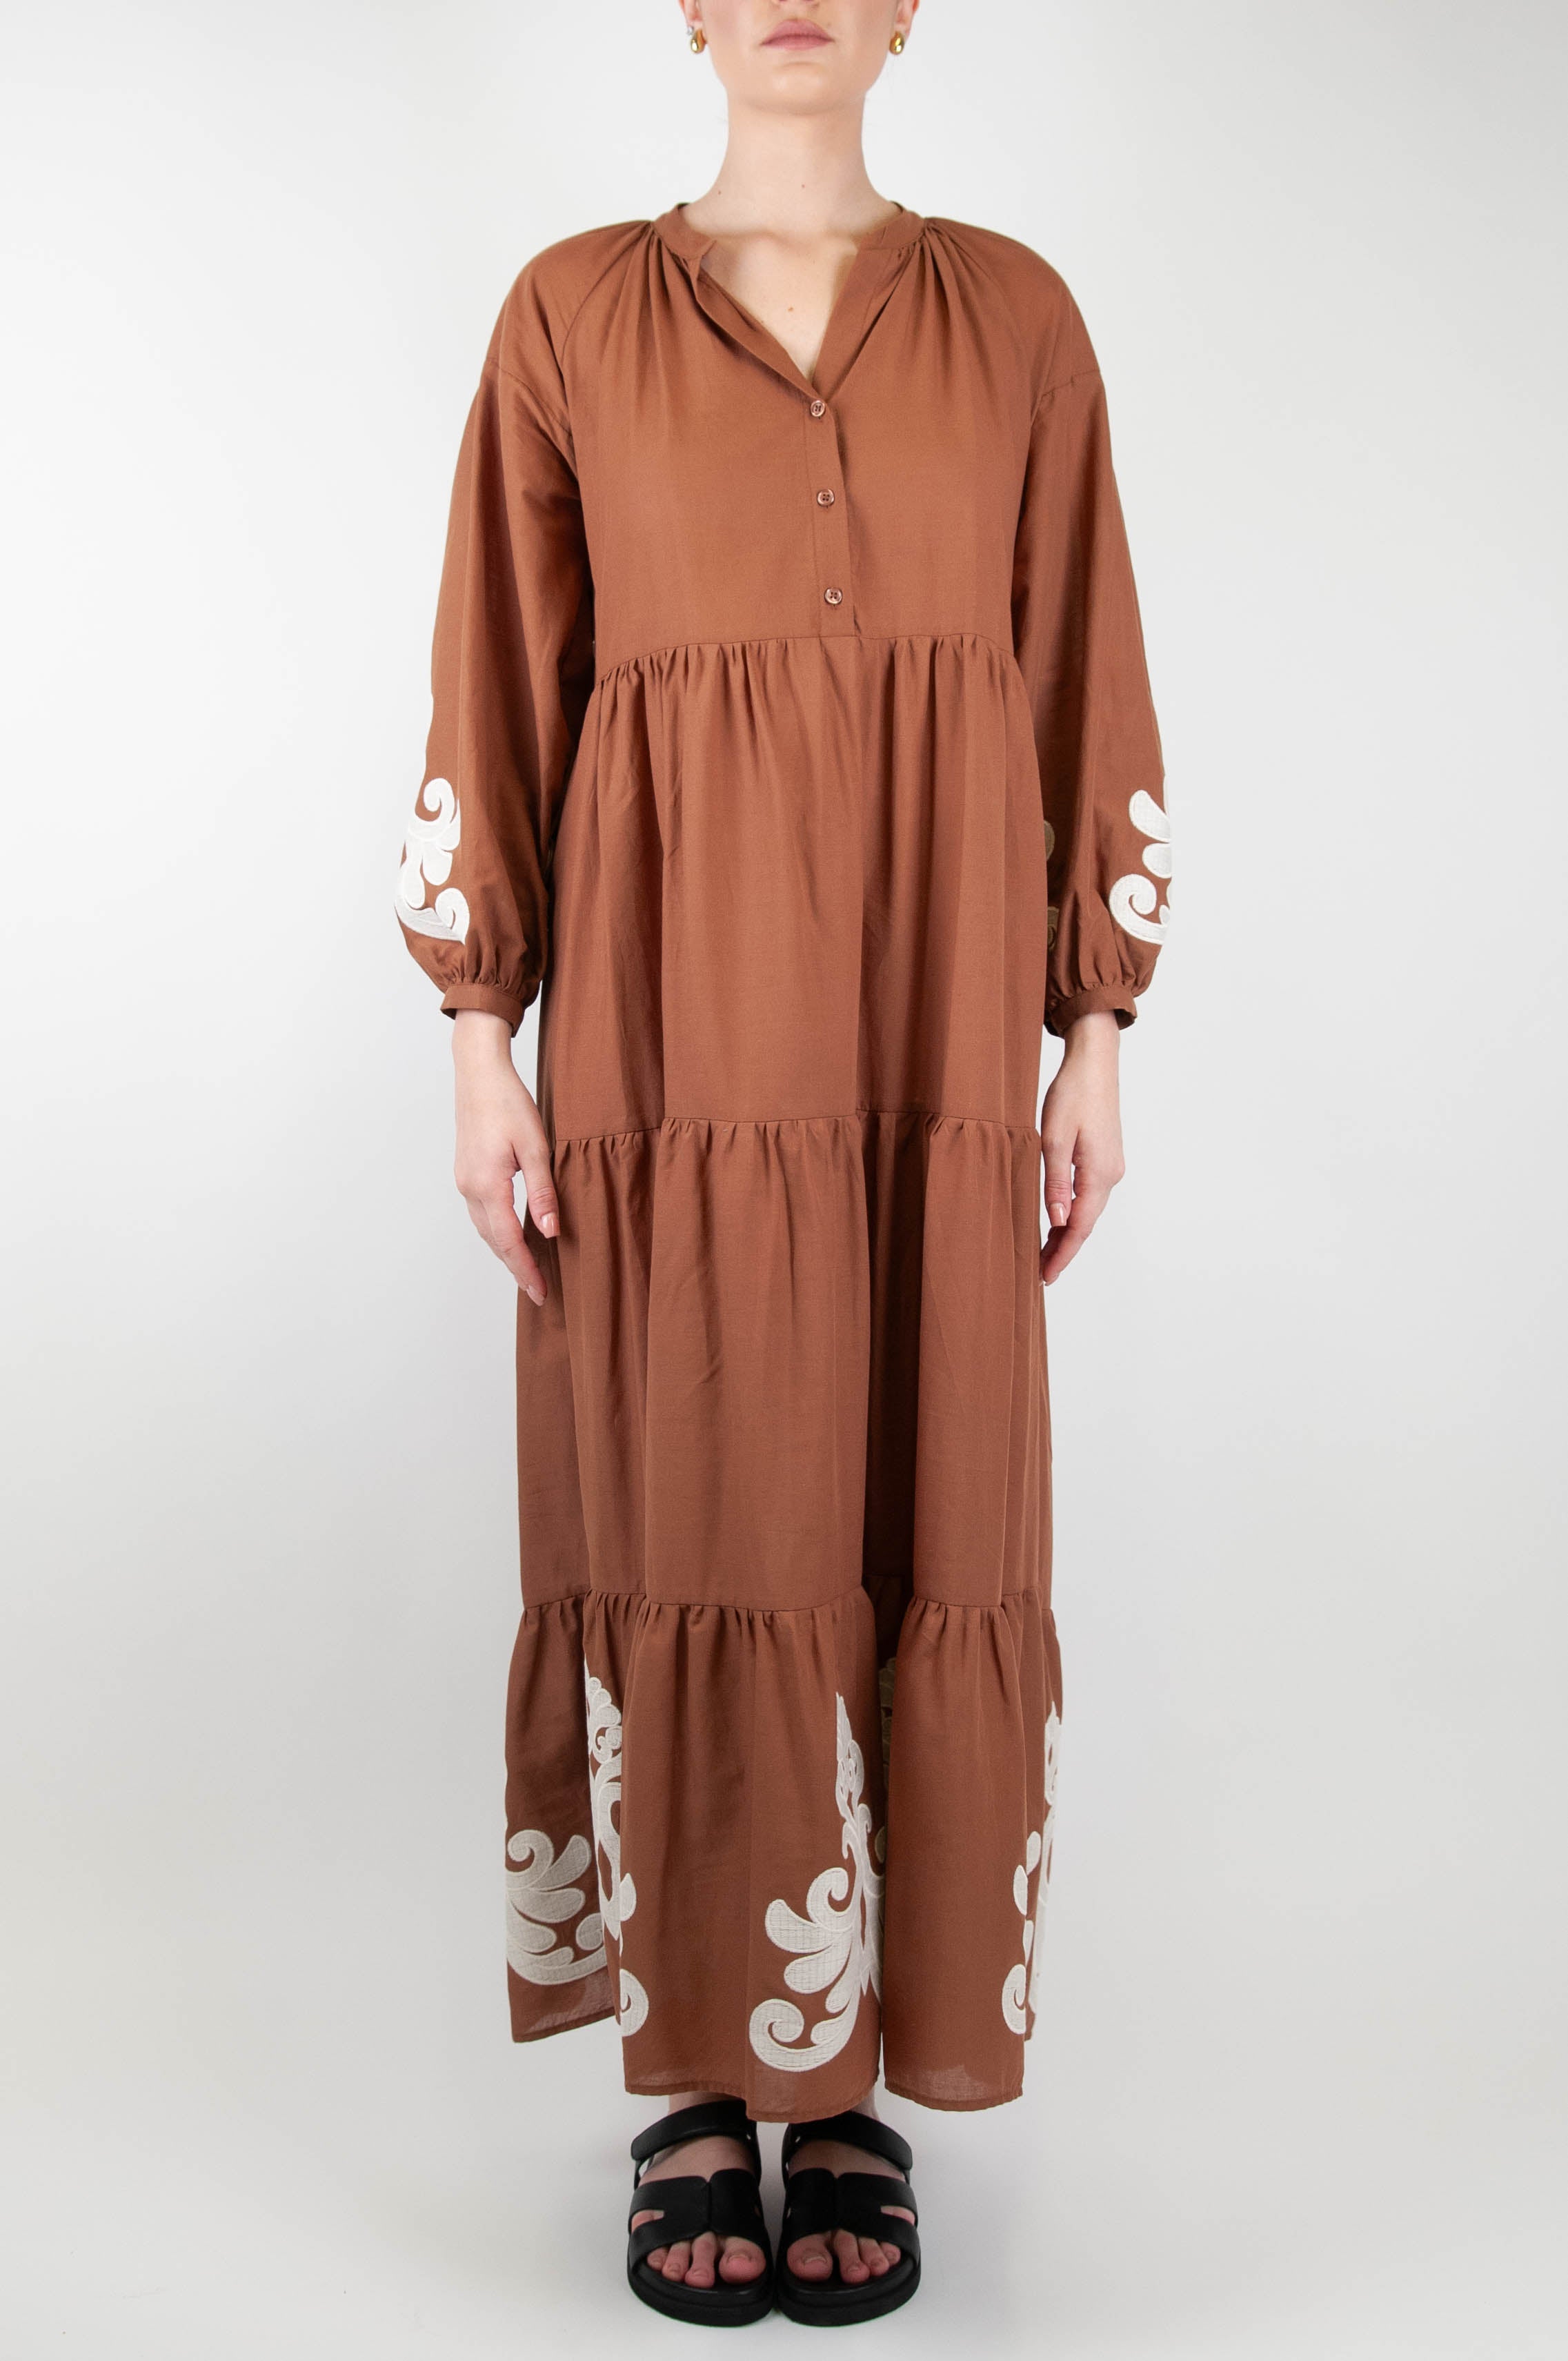 Dixie - Long dress with embroidery and flounces in cotton muslin